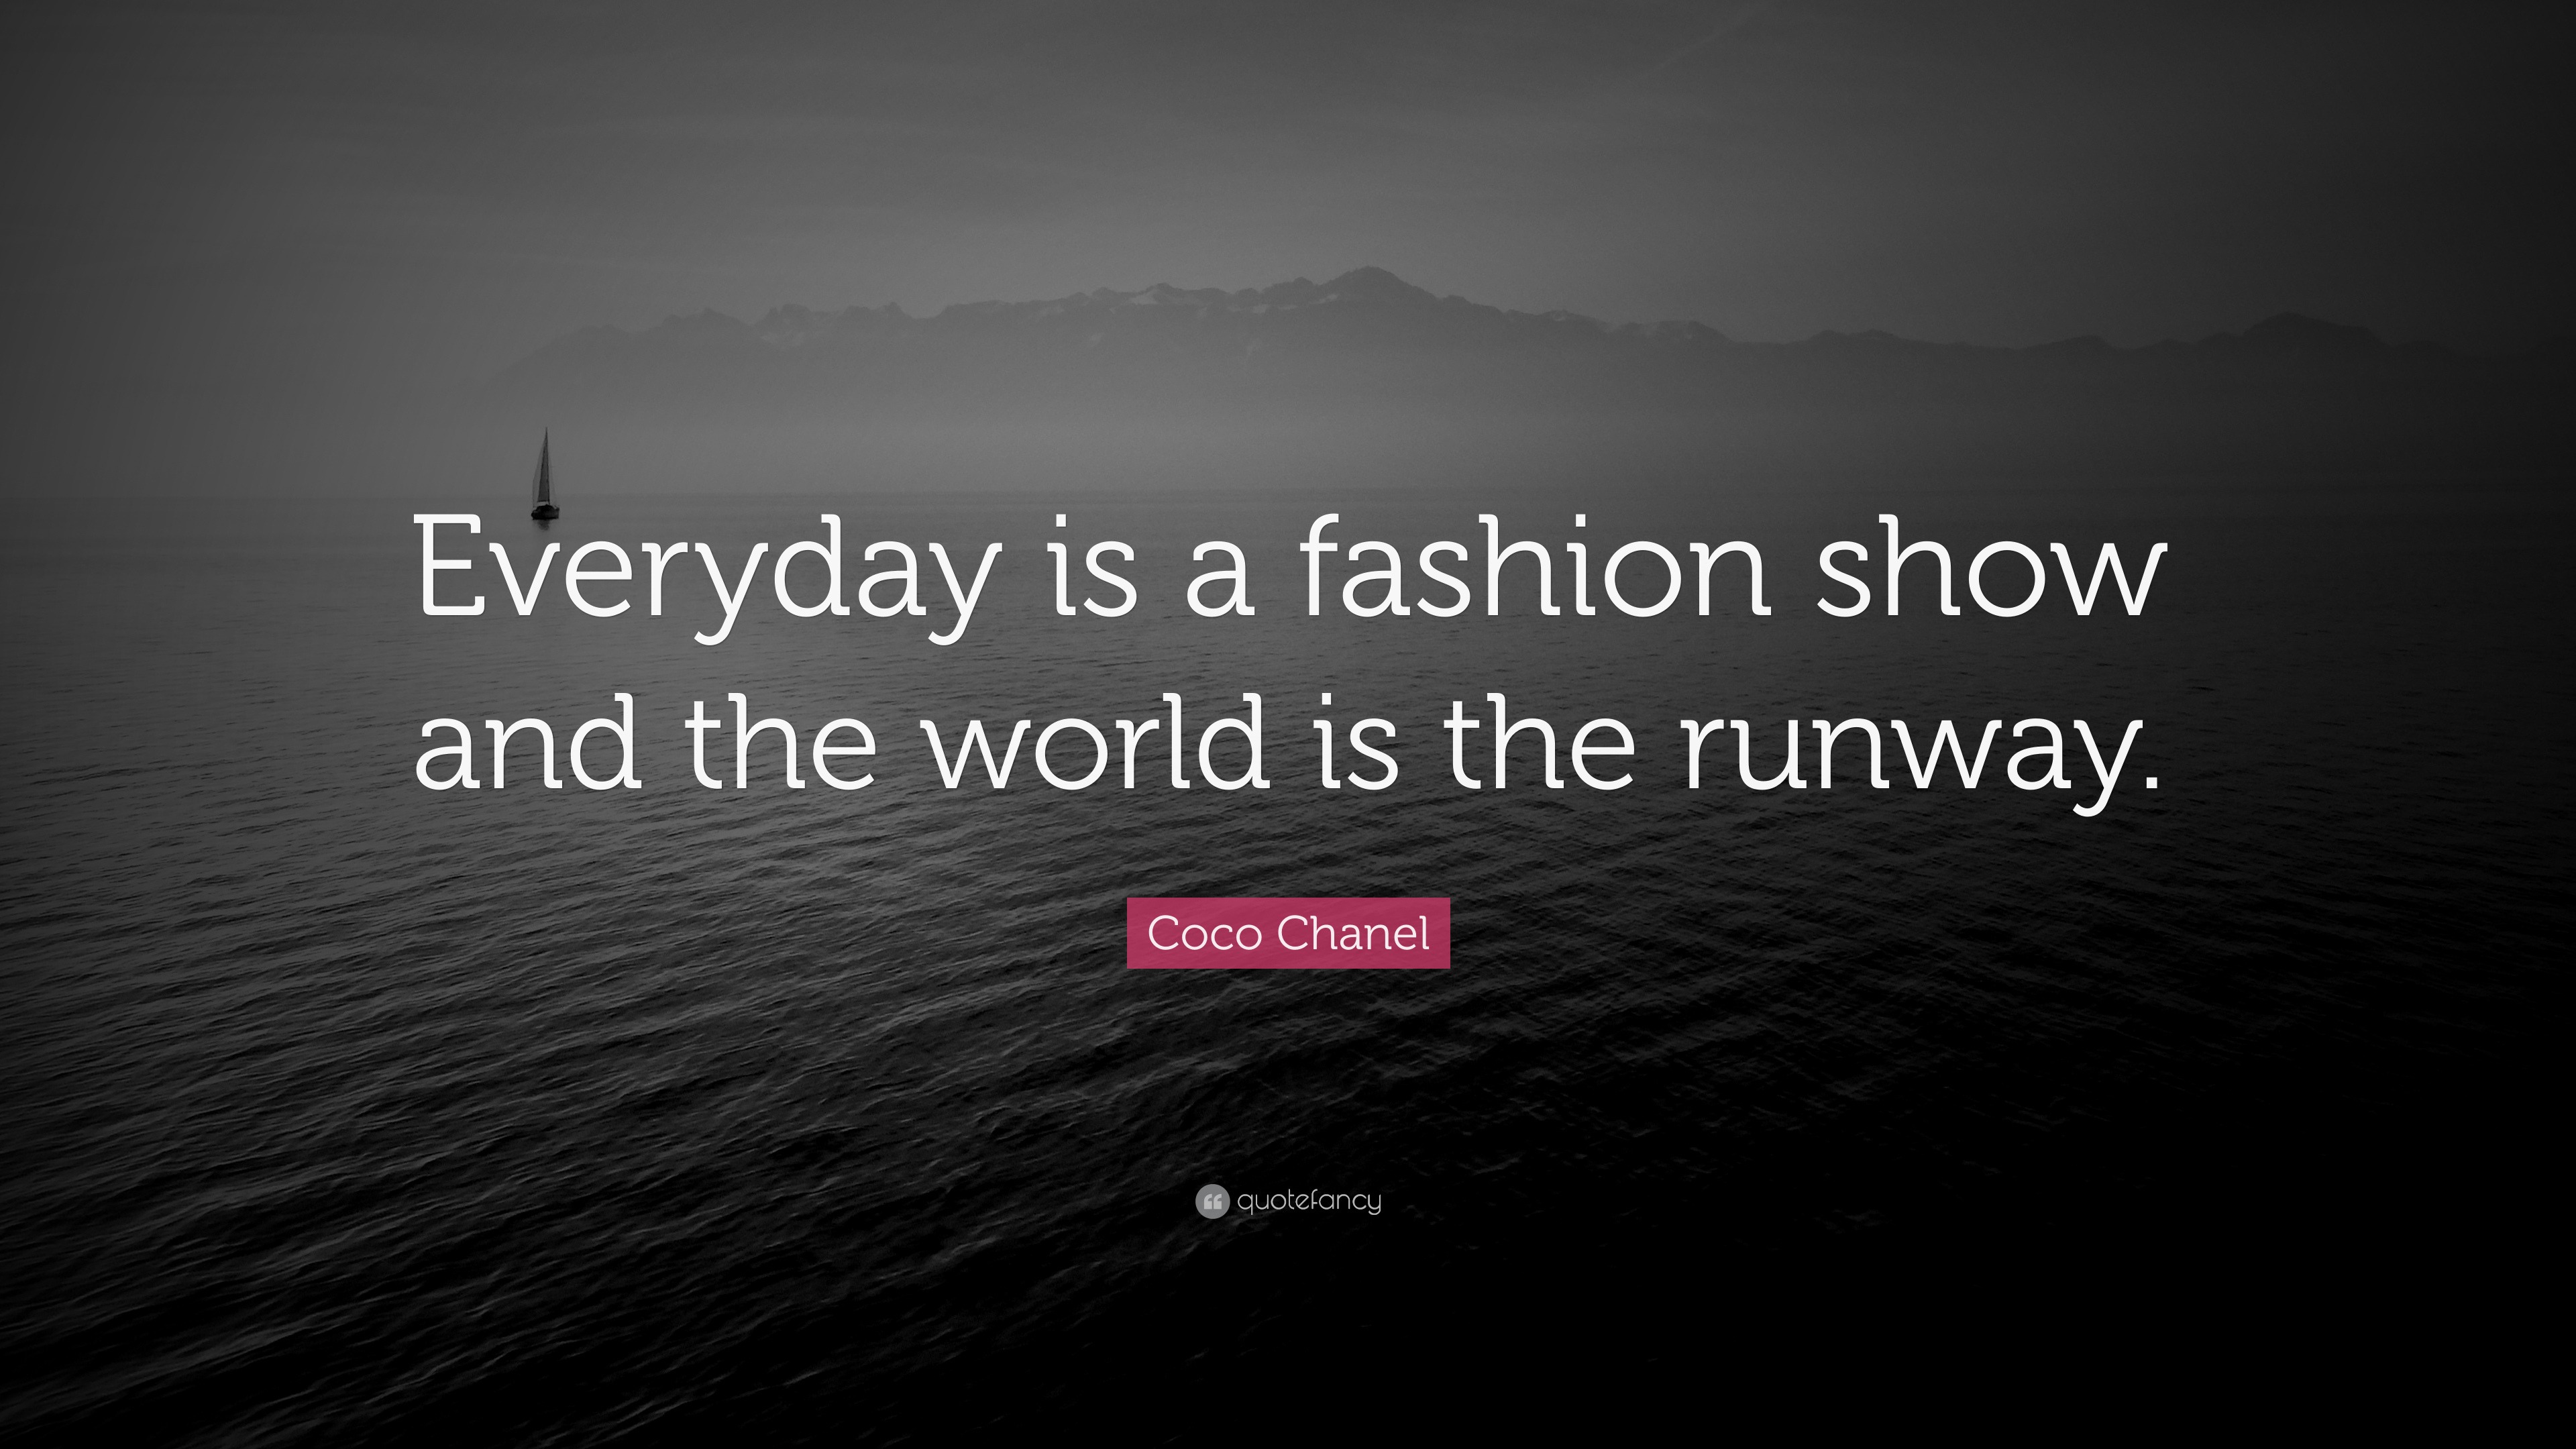 Coco Chanel Quote: “Everyday is a fashion show and the world is the